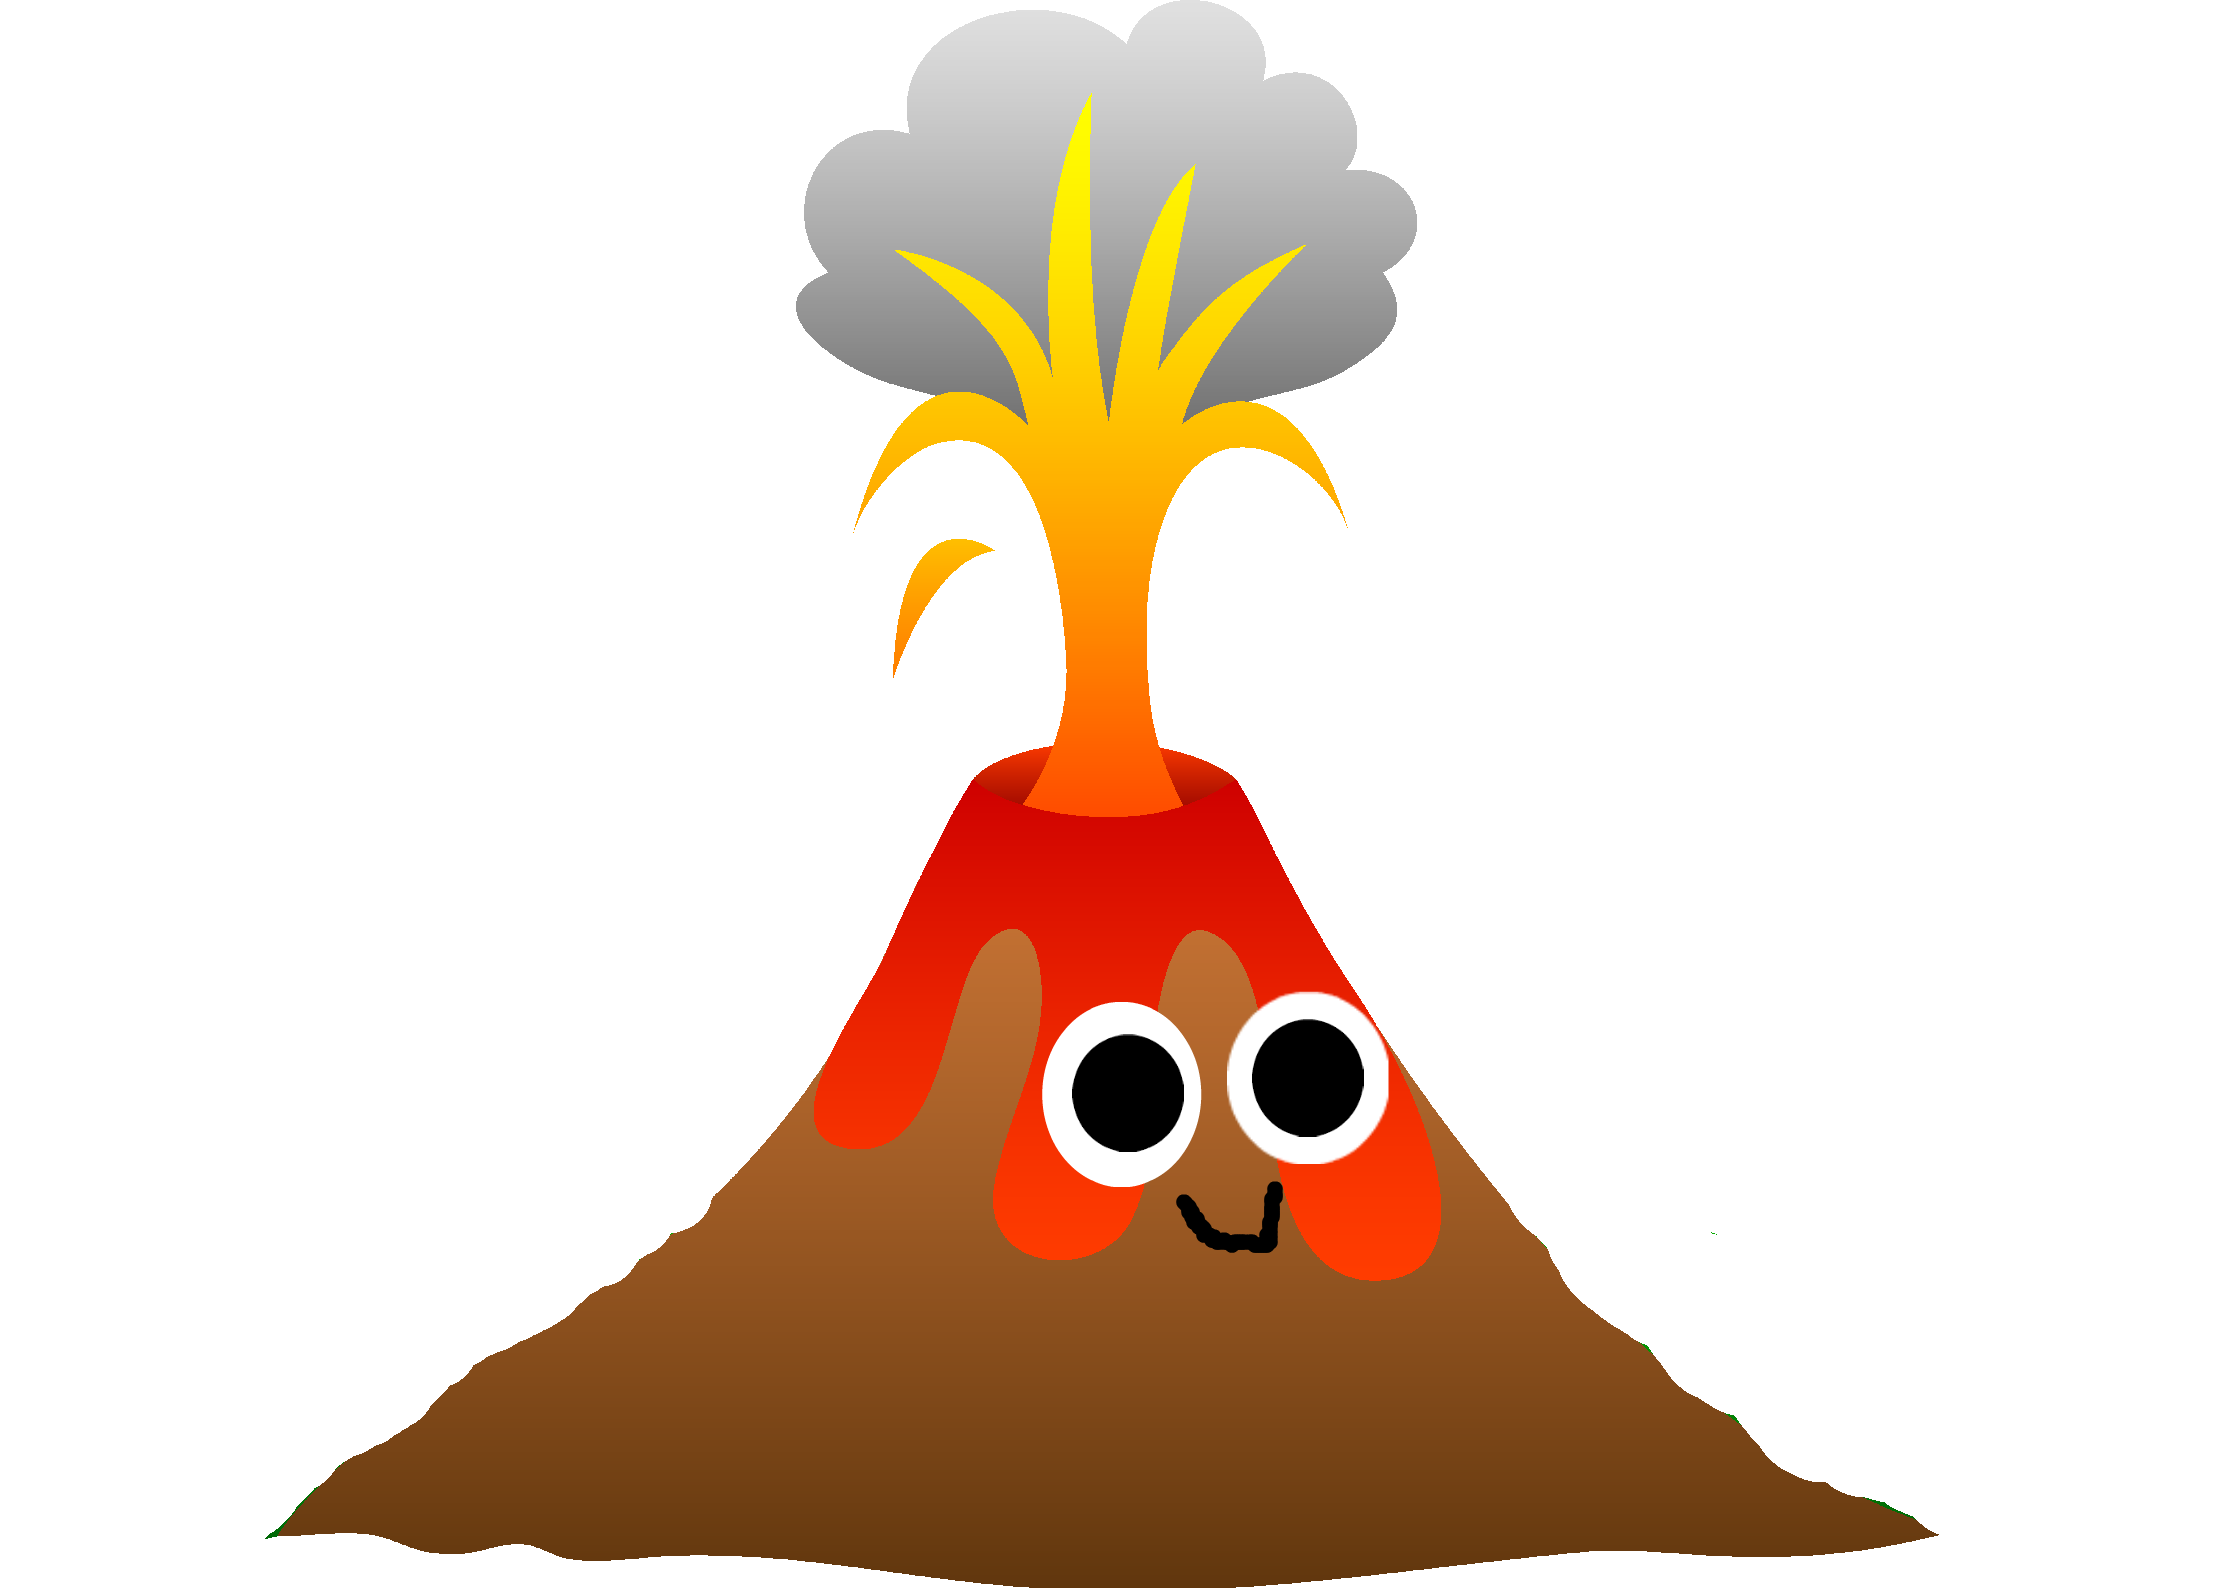 Eruption drawing at getdrawings. Cloud clipart volcano